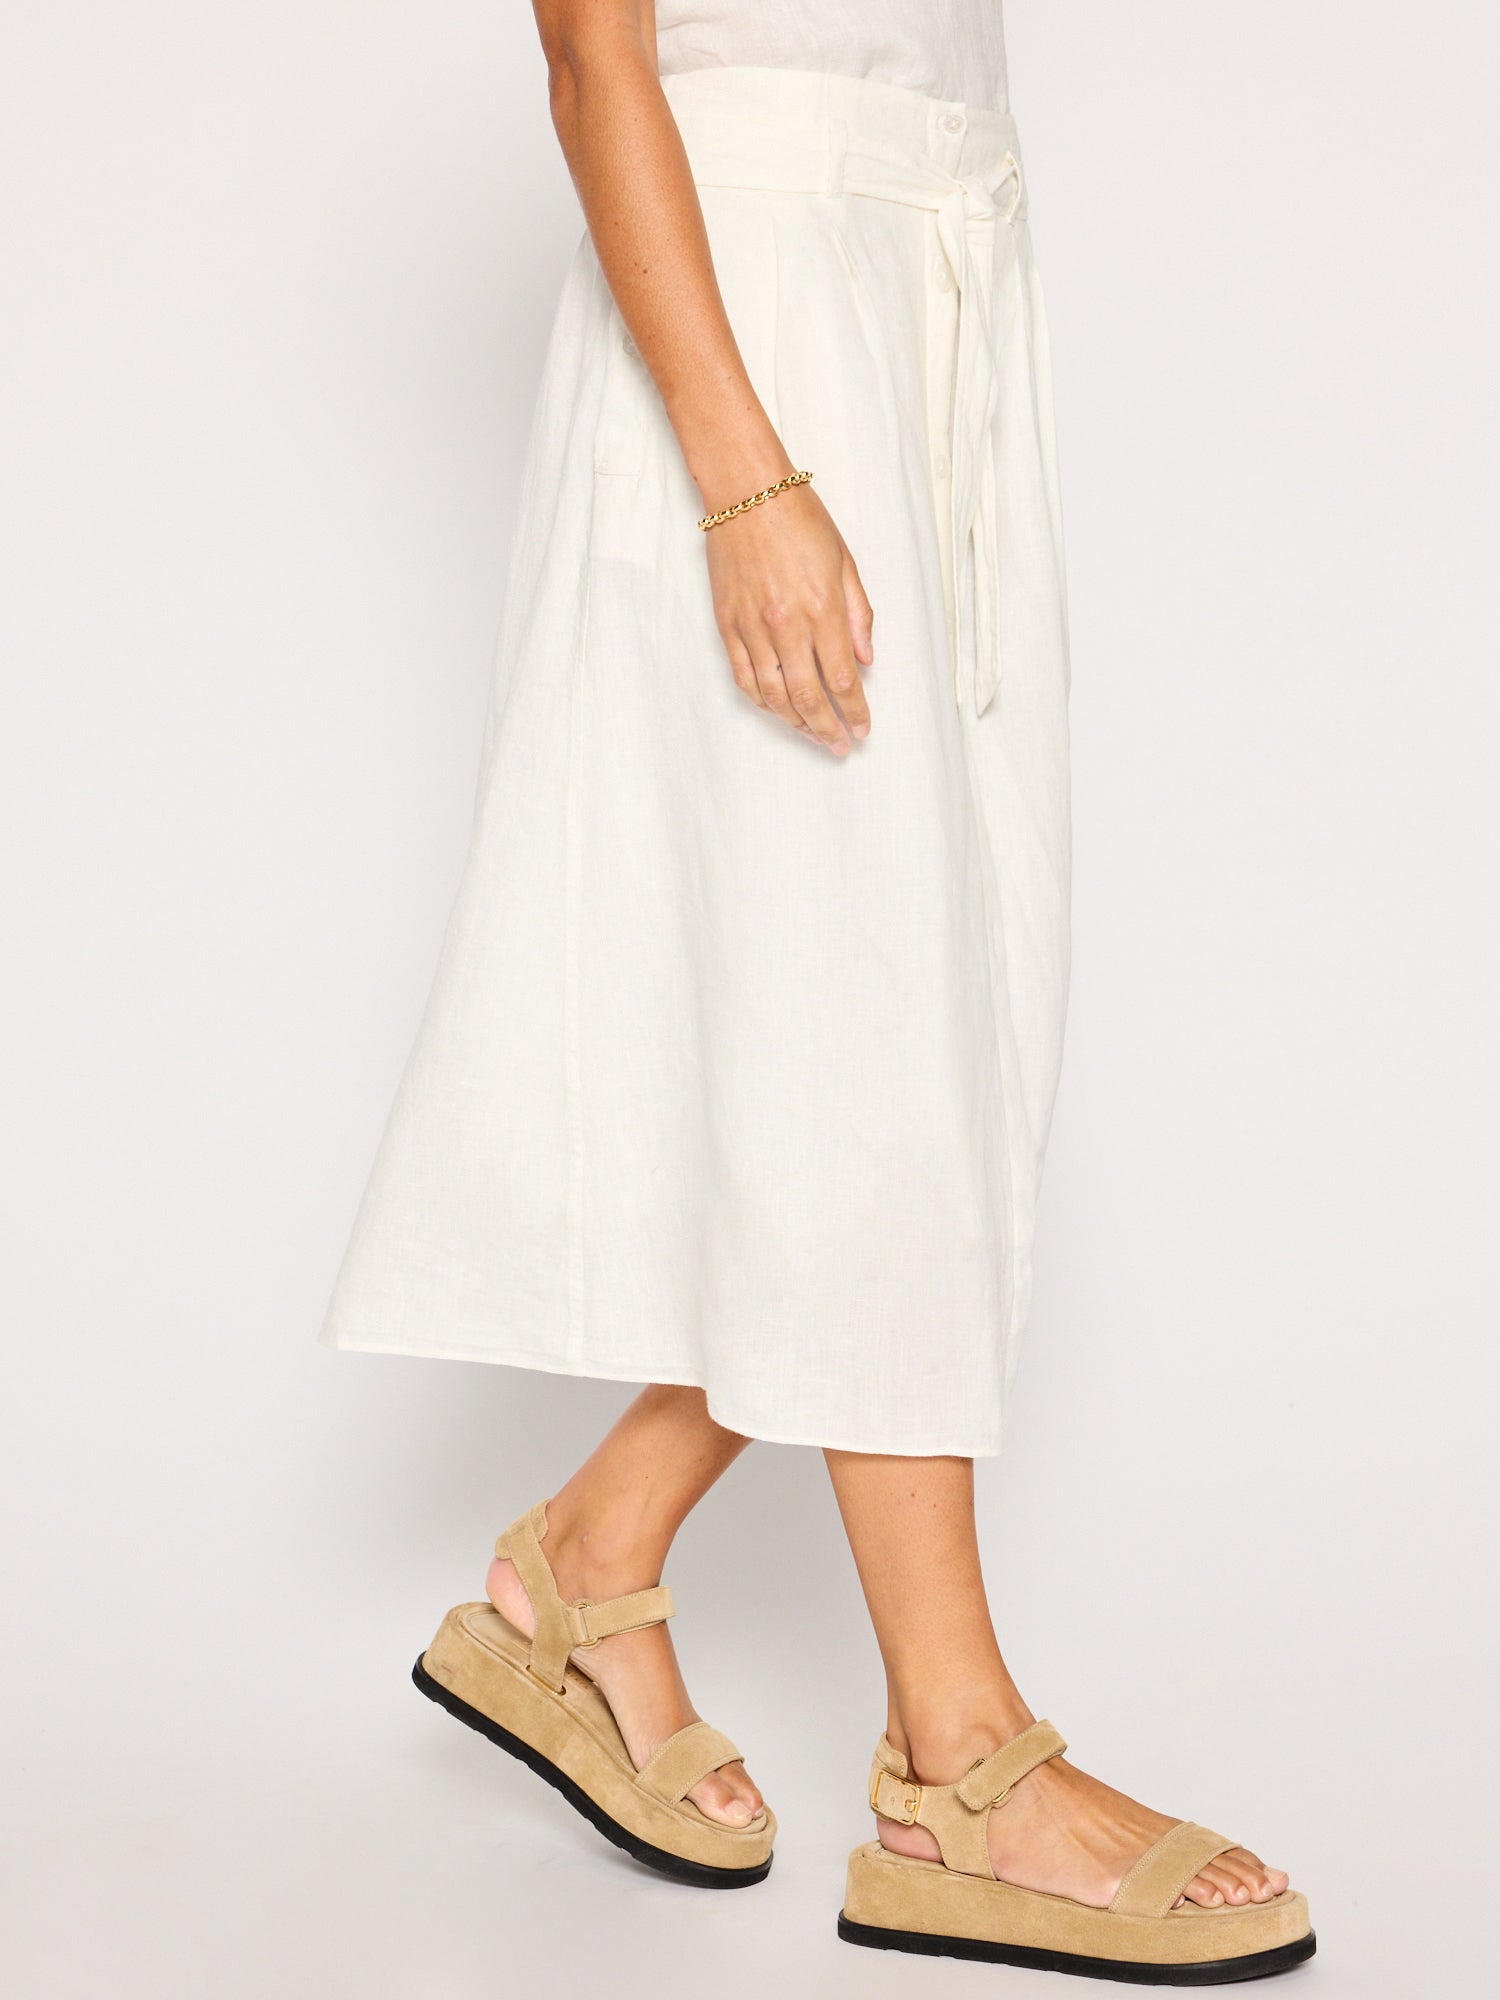 Teagan ivory belted button front midi skirt side view